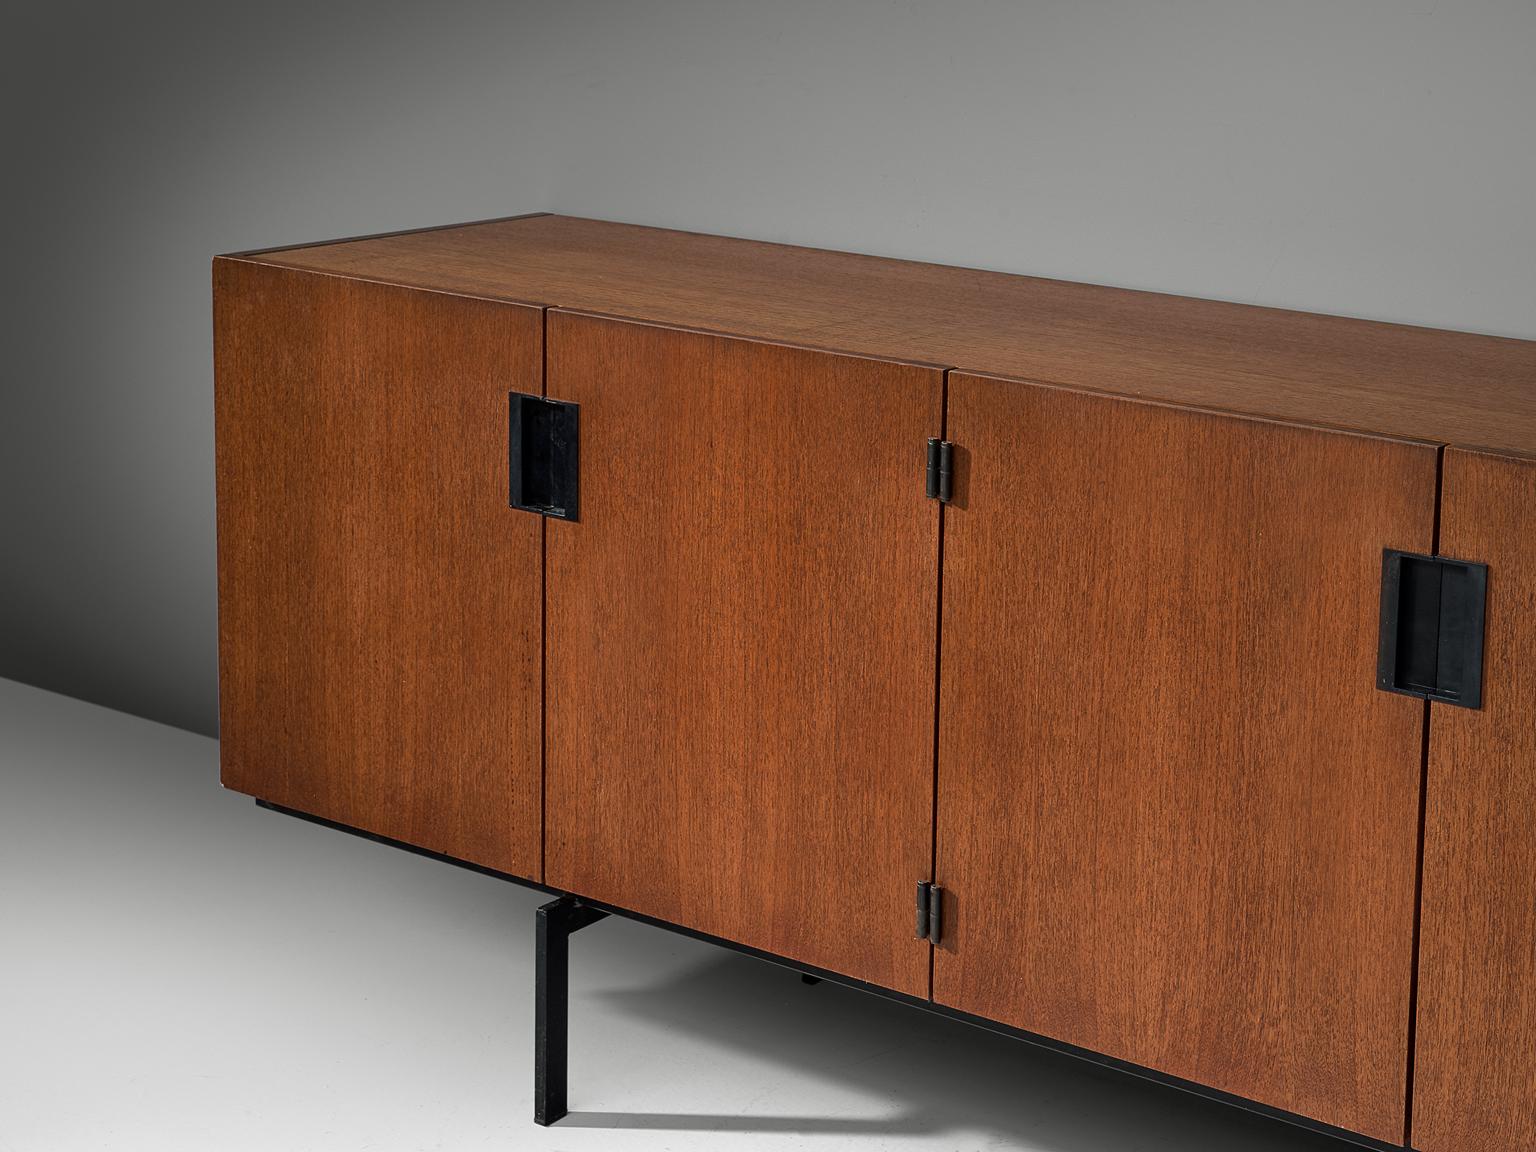 Metal Cees Braakman Credenza for Pastoe from the Japanese Series